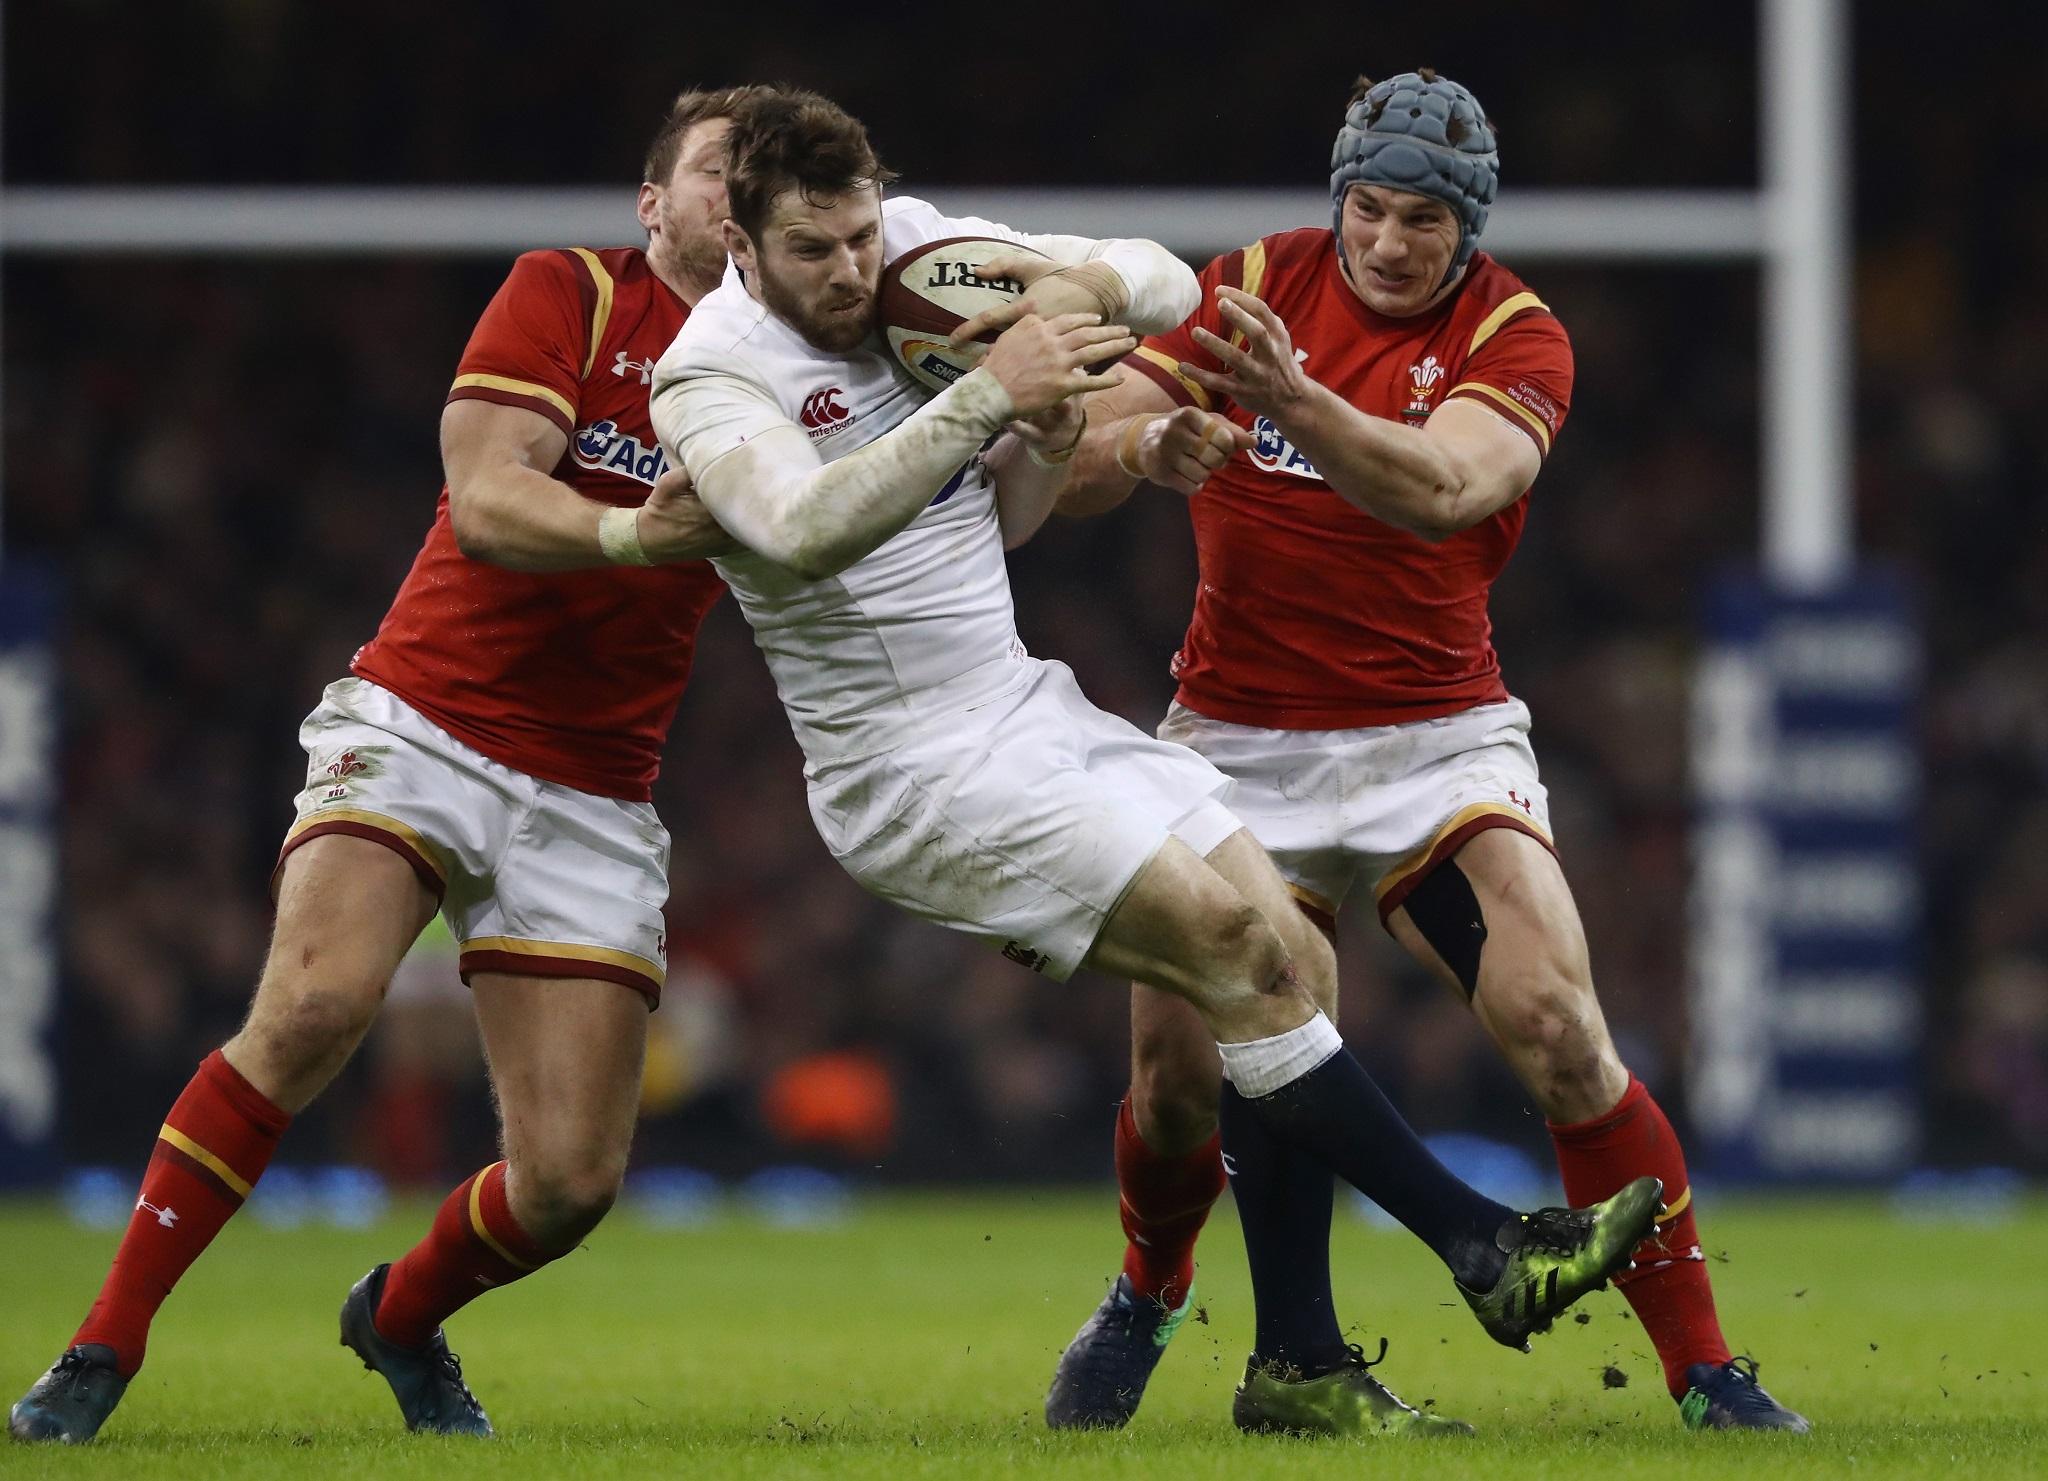 Elliot Daly scored the winning try for England as they beat Wales 21-16